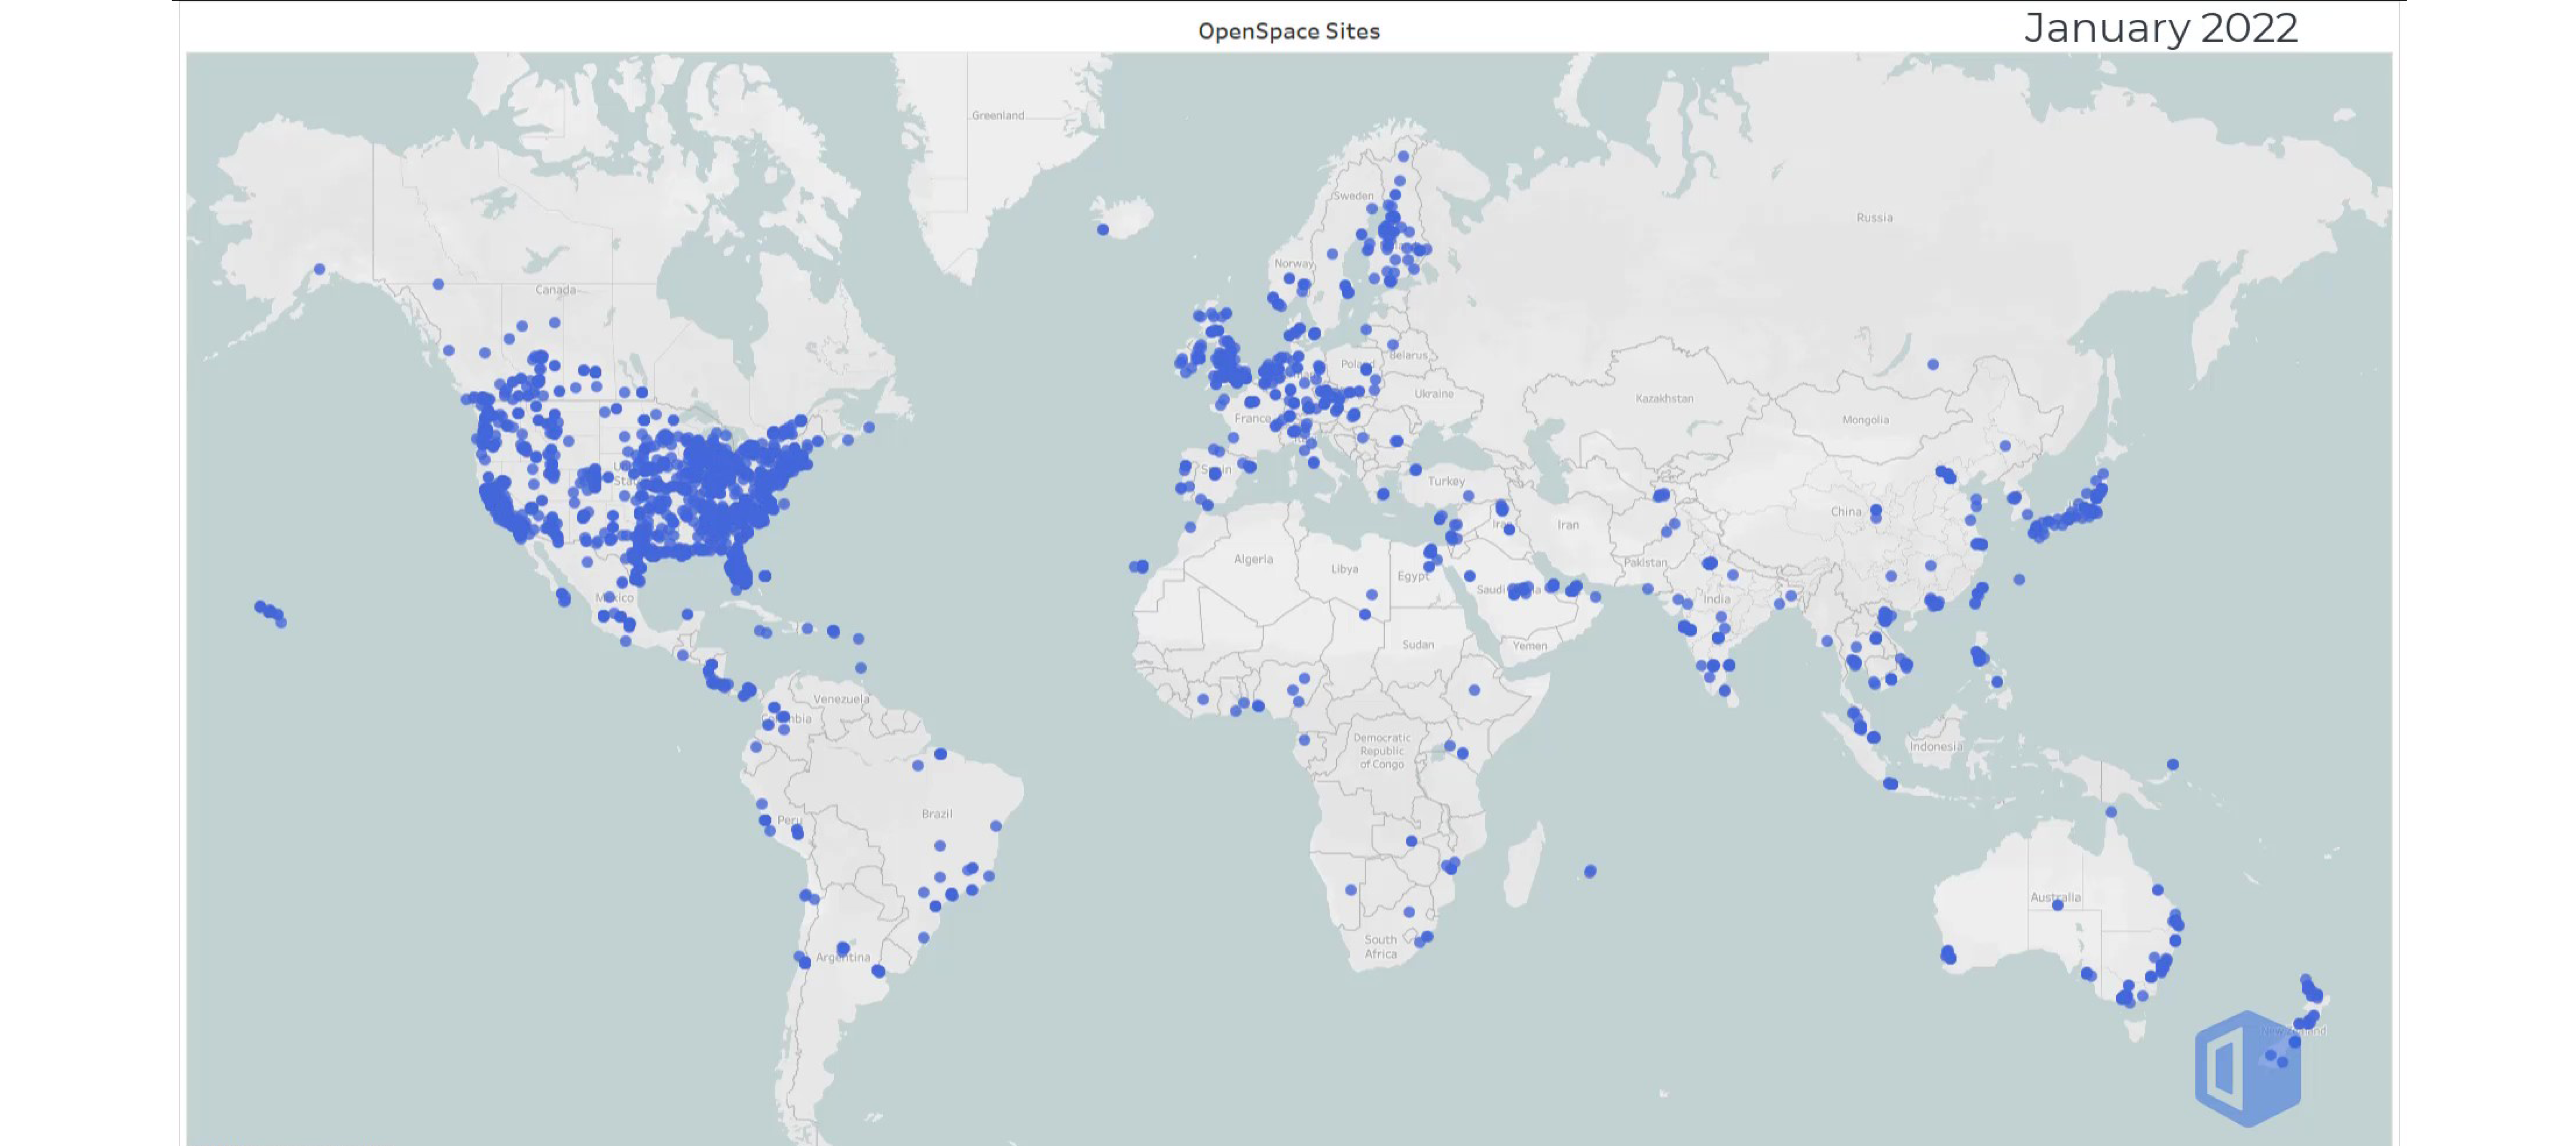 OpenSpace is in over 70 countries! THANKS TO ALL OF YOU!